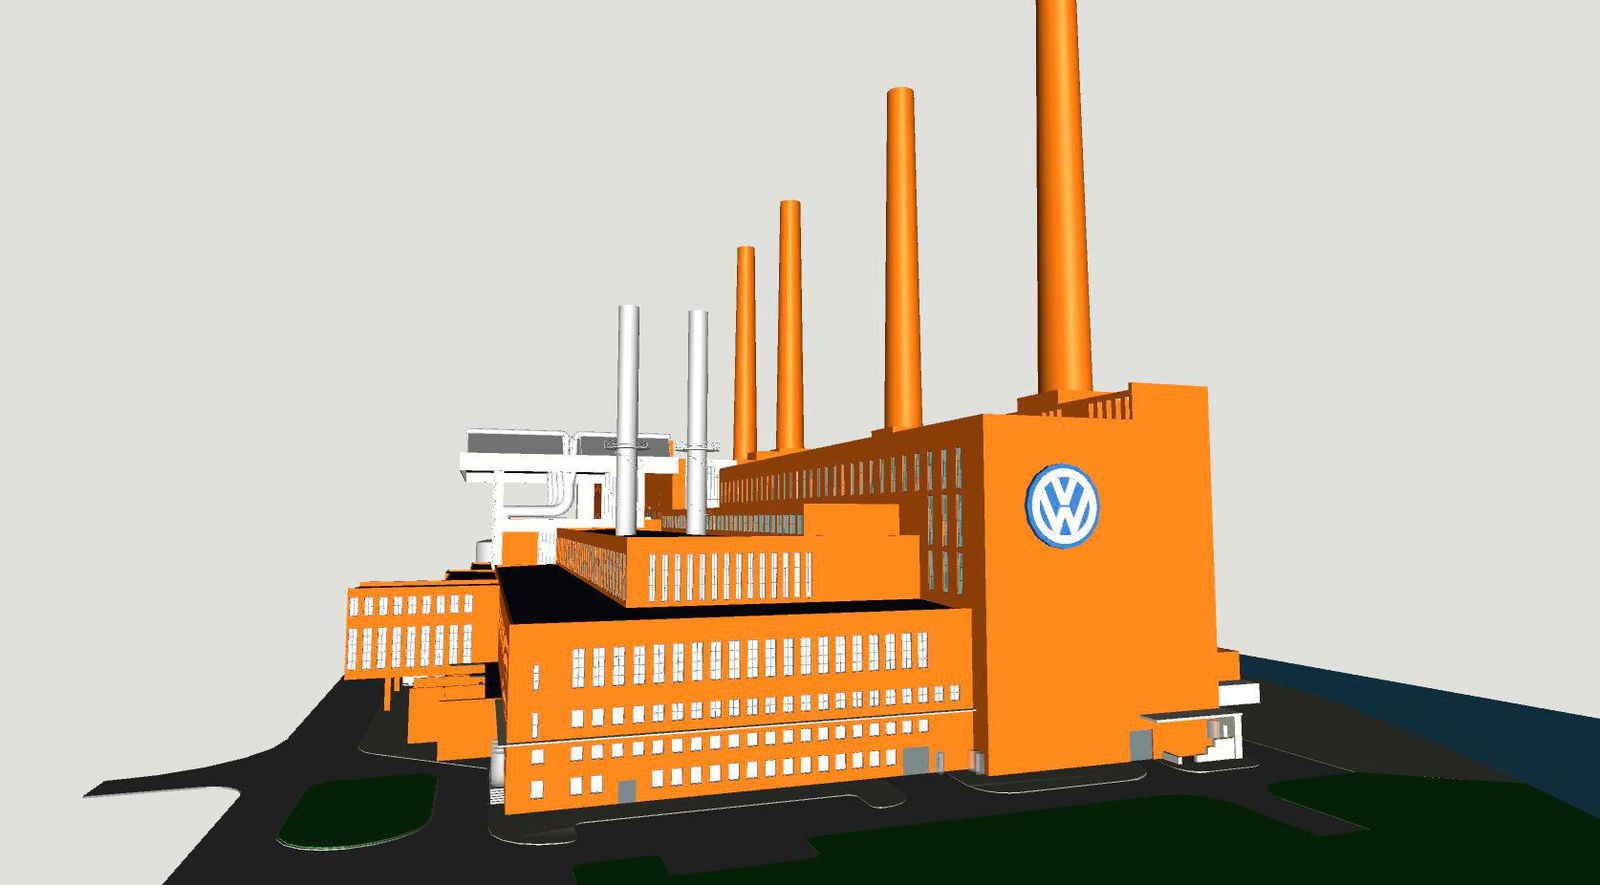 Volkswagen Group realigns energy supplies: company power stations to change over from coal to gas